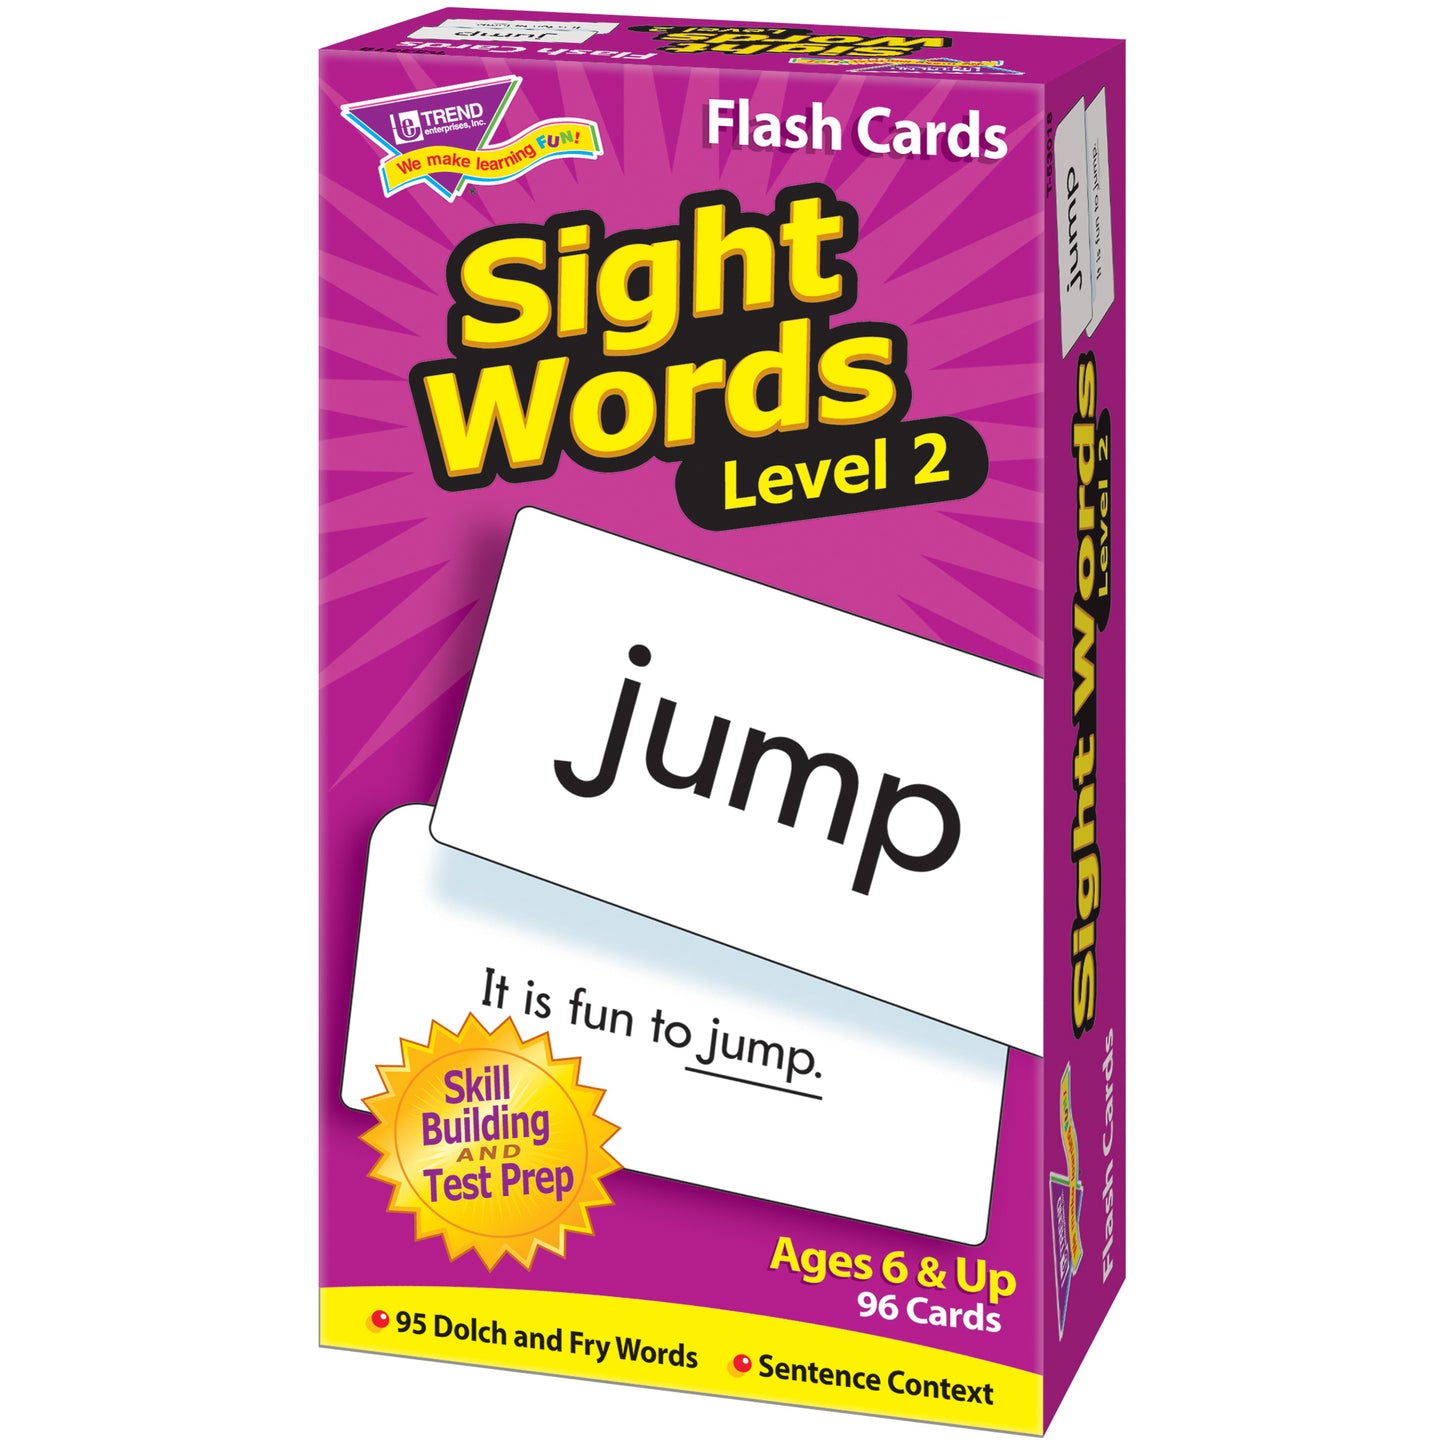 Sight Words – Level 2 Skill Drill Flash Cards, 3 Packs